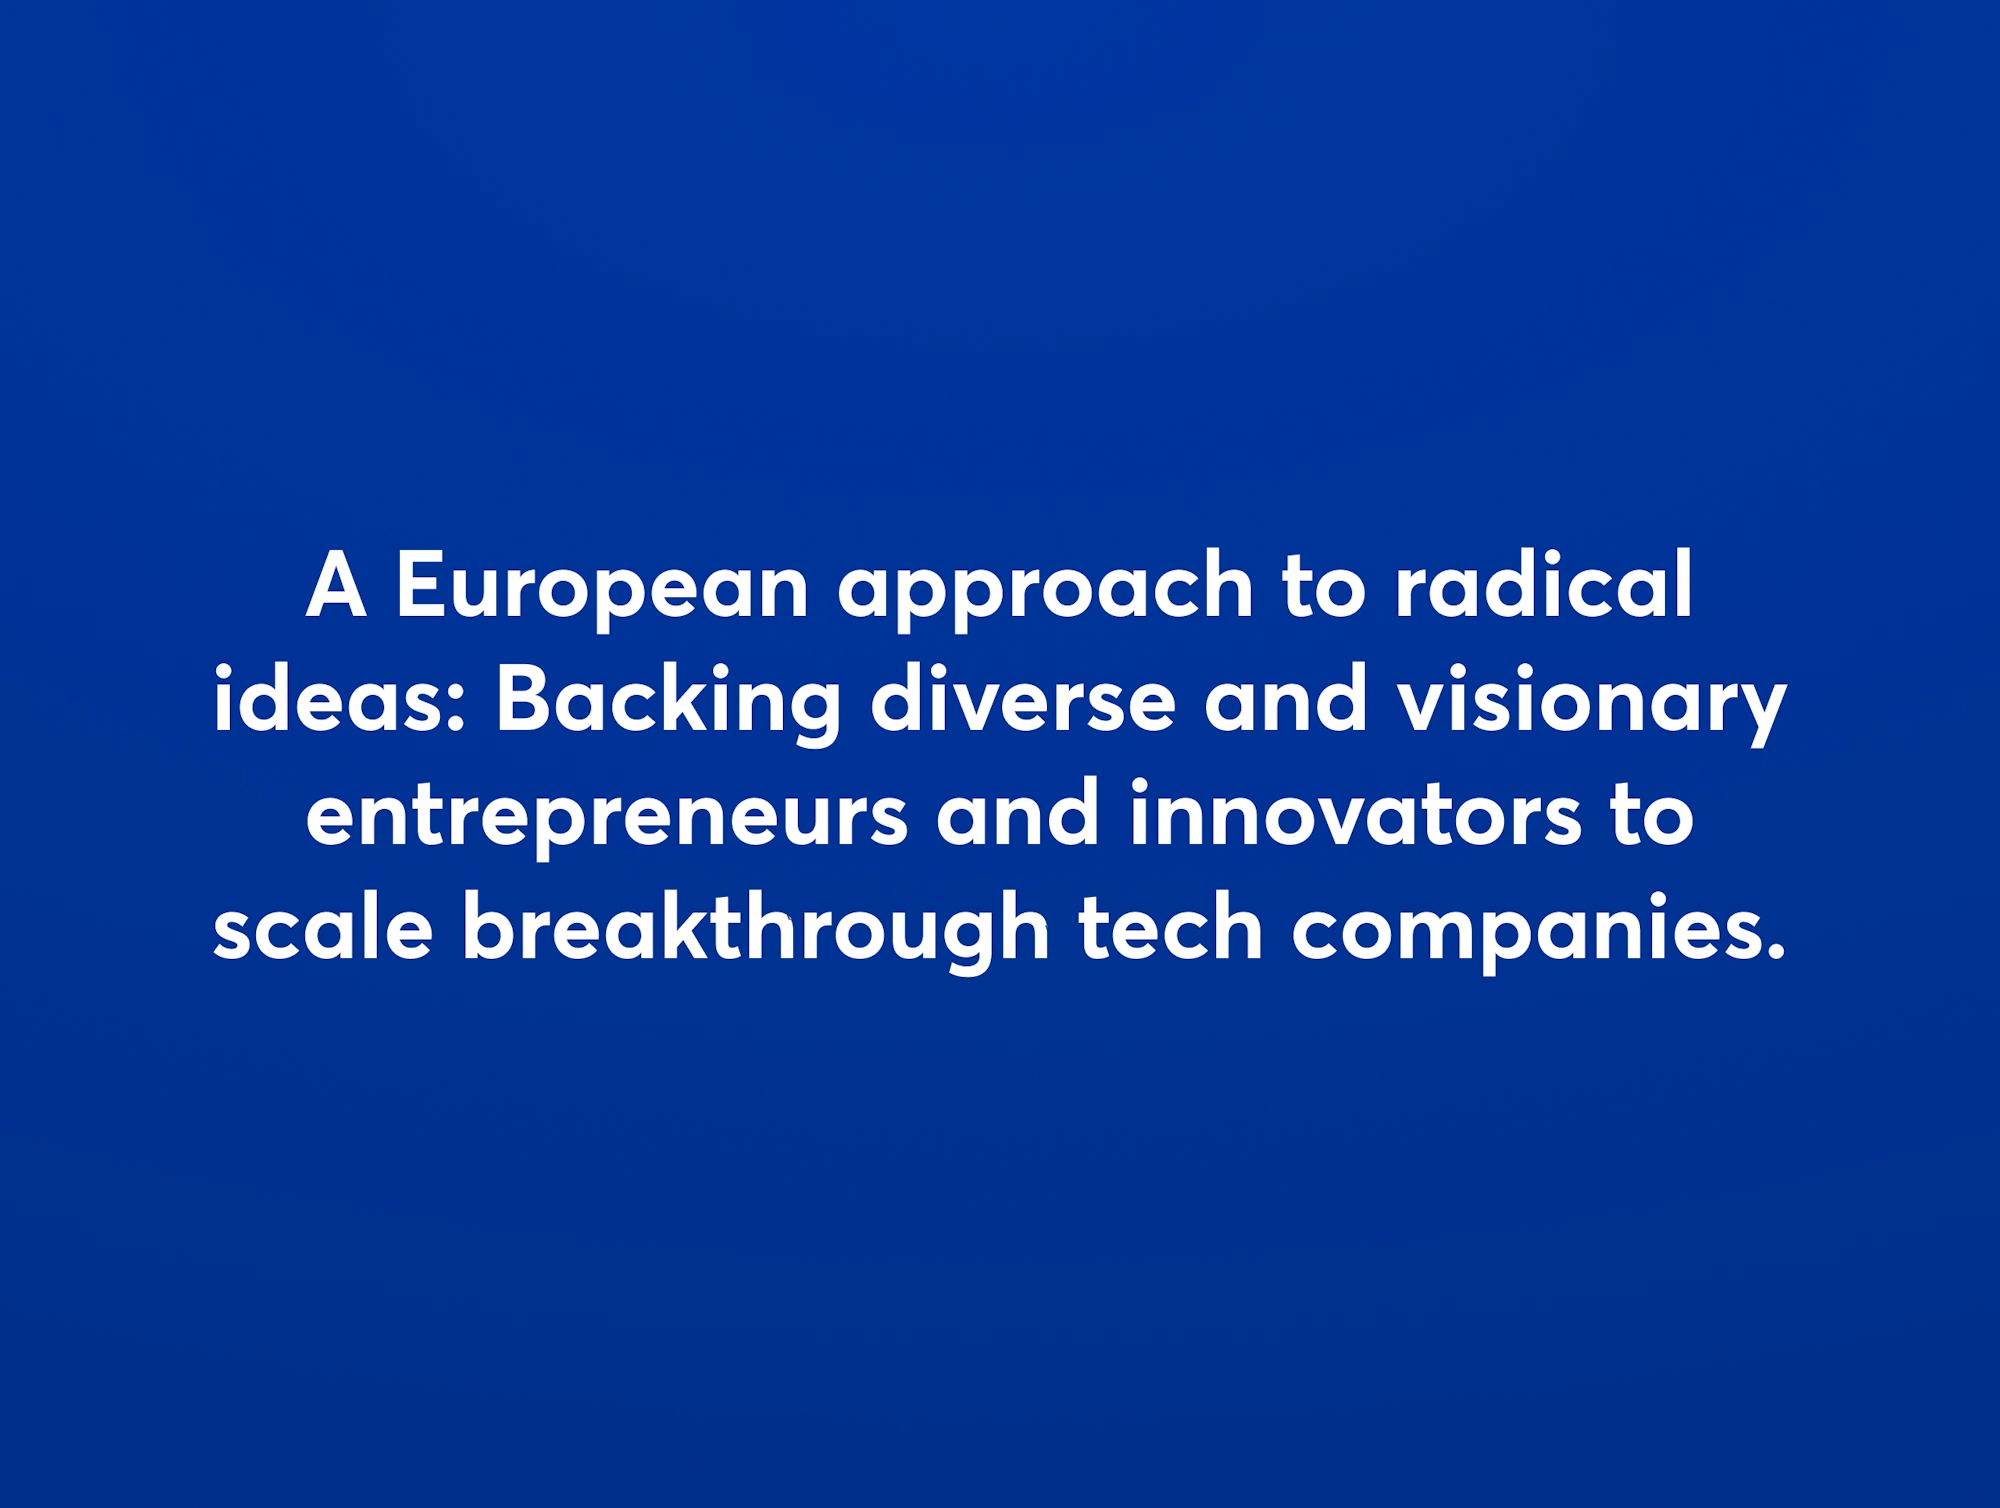 EIC - Innovation for Europe